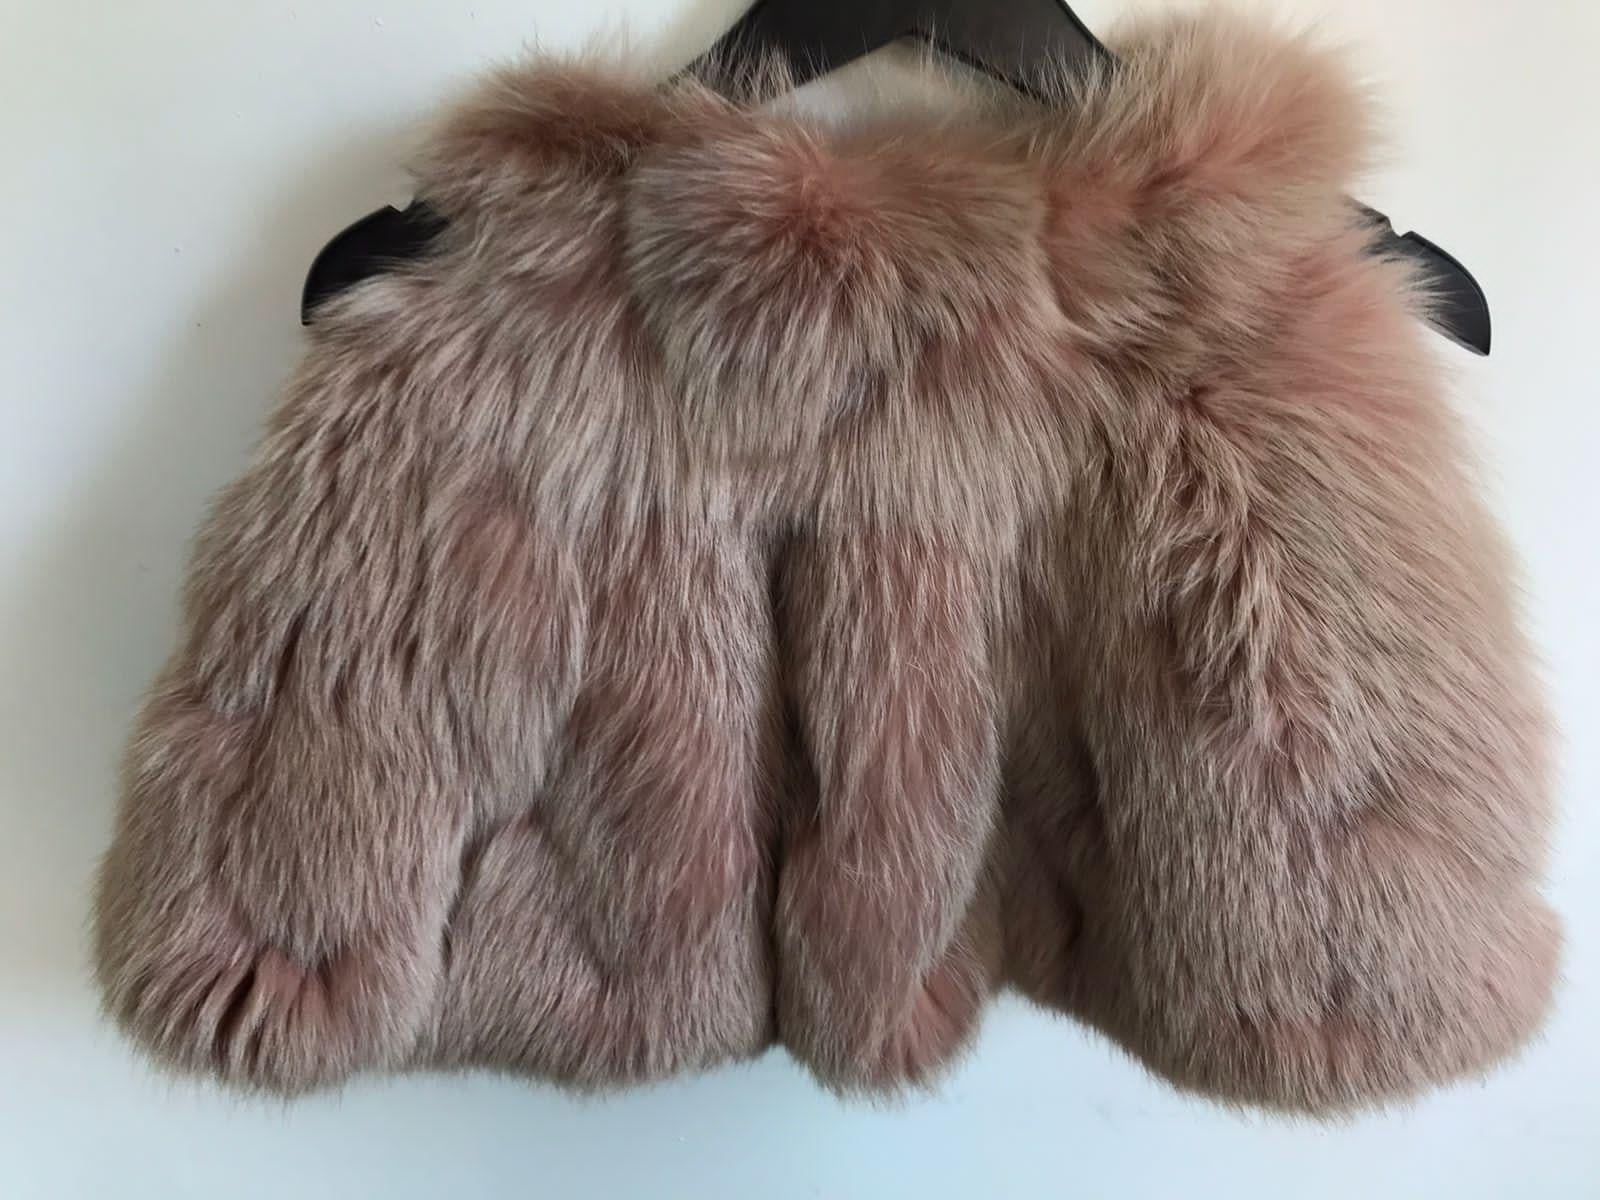 Rare Louis Vuitton fox fur bolero jacket. Overall still in excellent condition. With polyester-silk lining. Super good deal! 